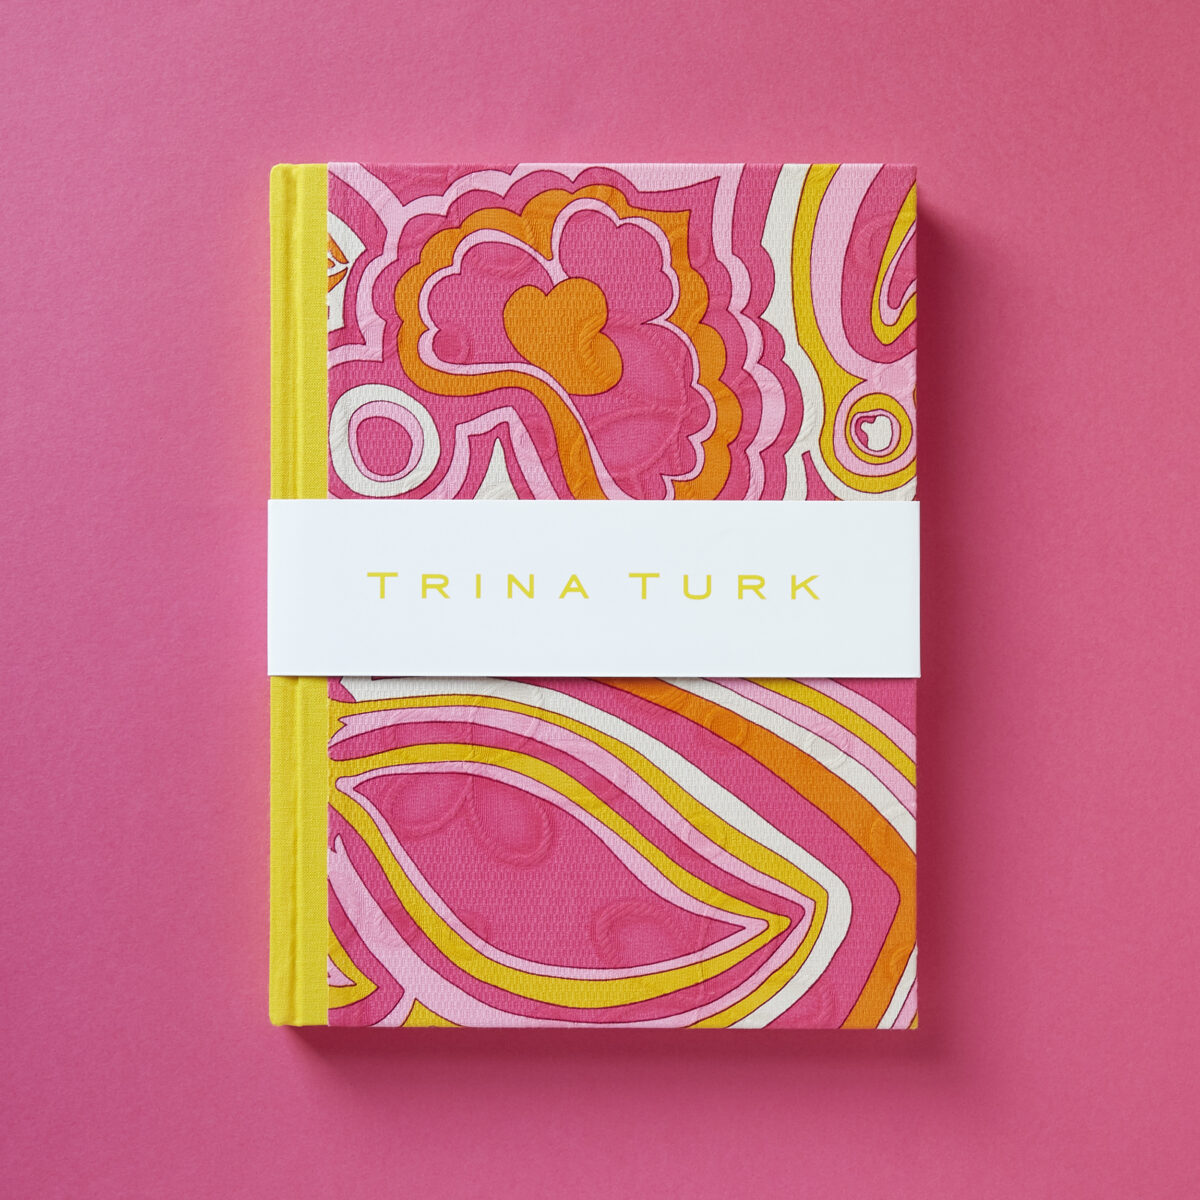 Trina Turk's joyful designs evoke a world of sunshine and whimsy. In this interview on the Aesthetics of Joy, she gives us a peek into her colorful, creative life. Image from Trina Turk, published by Chronicle Chroma 2020. 